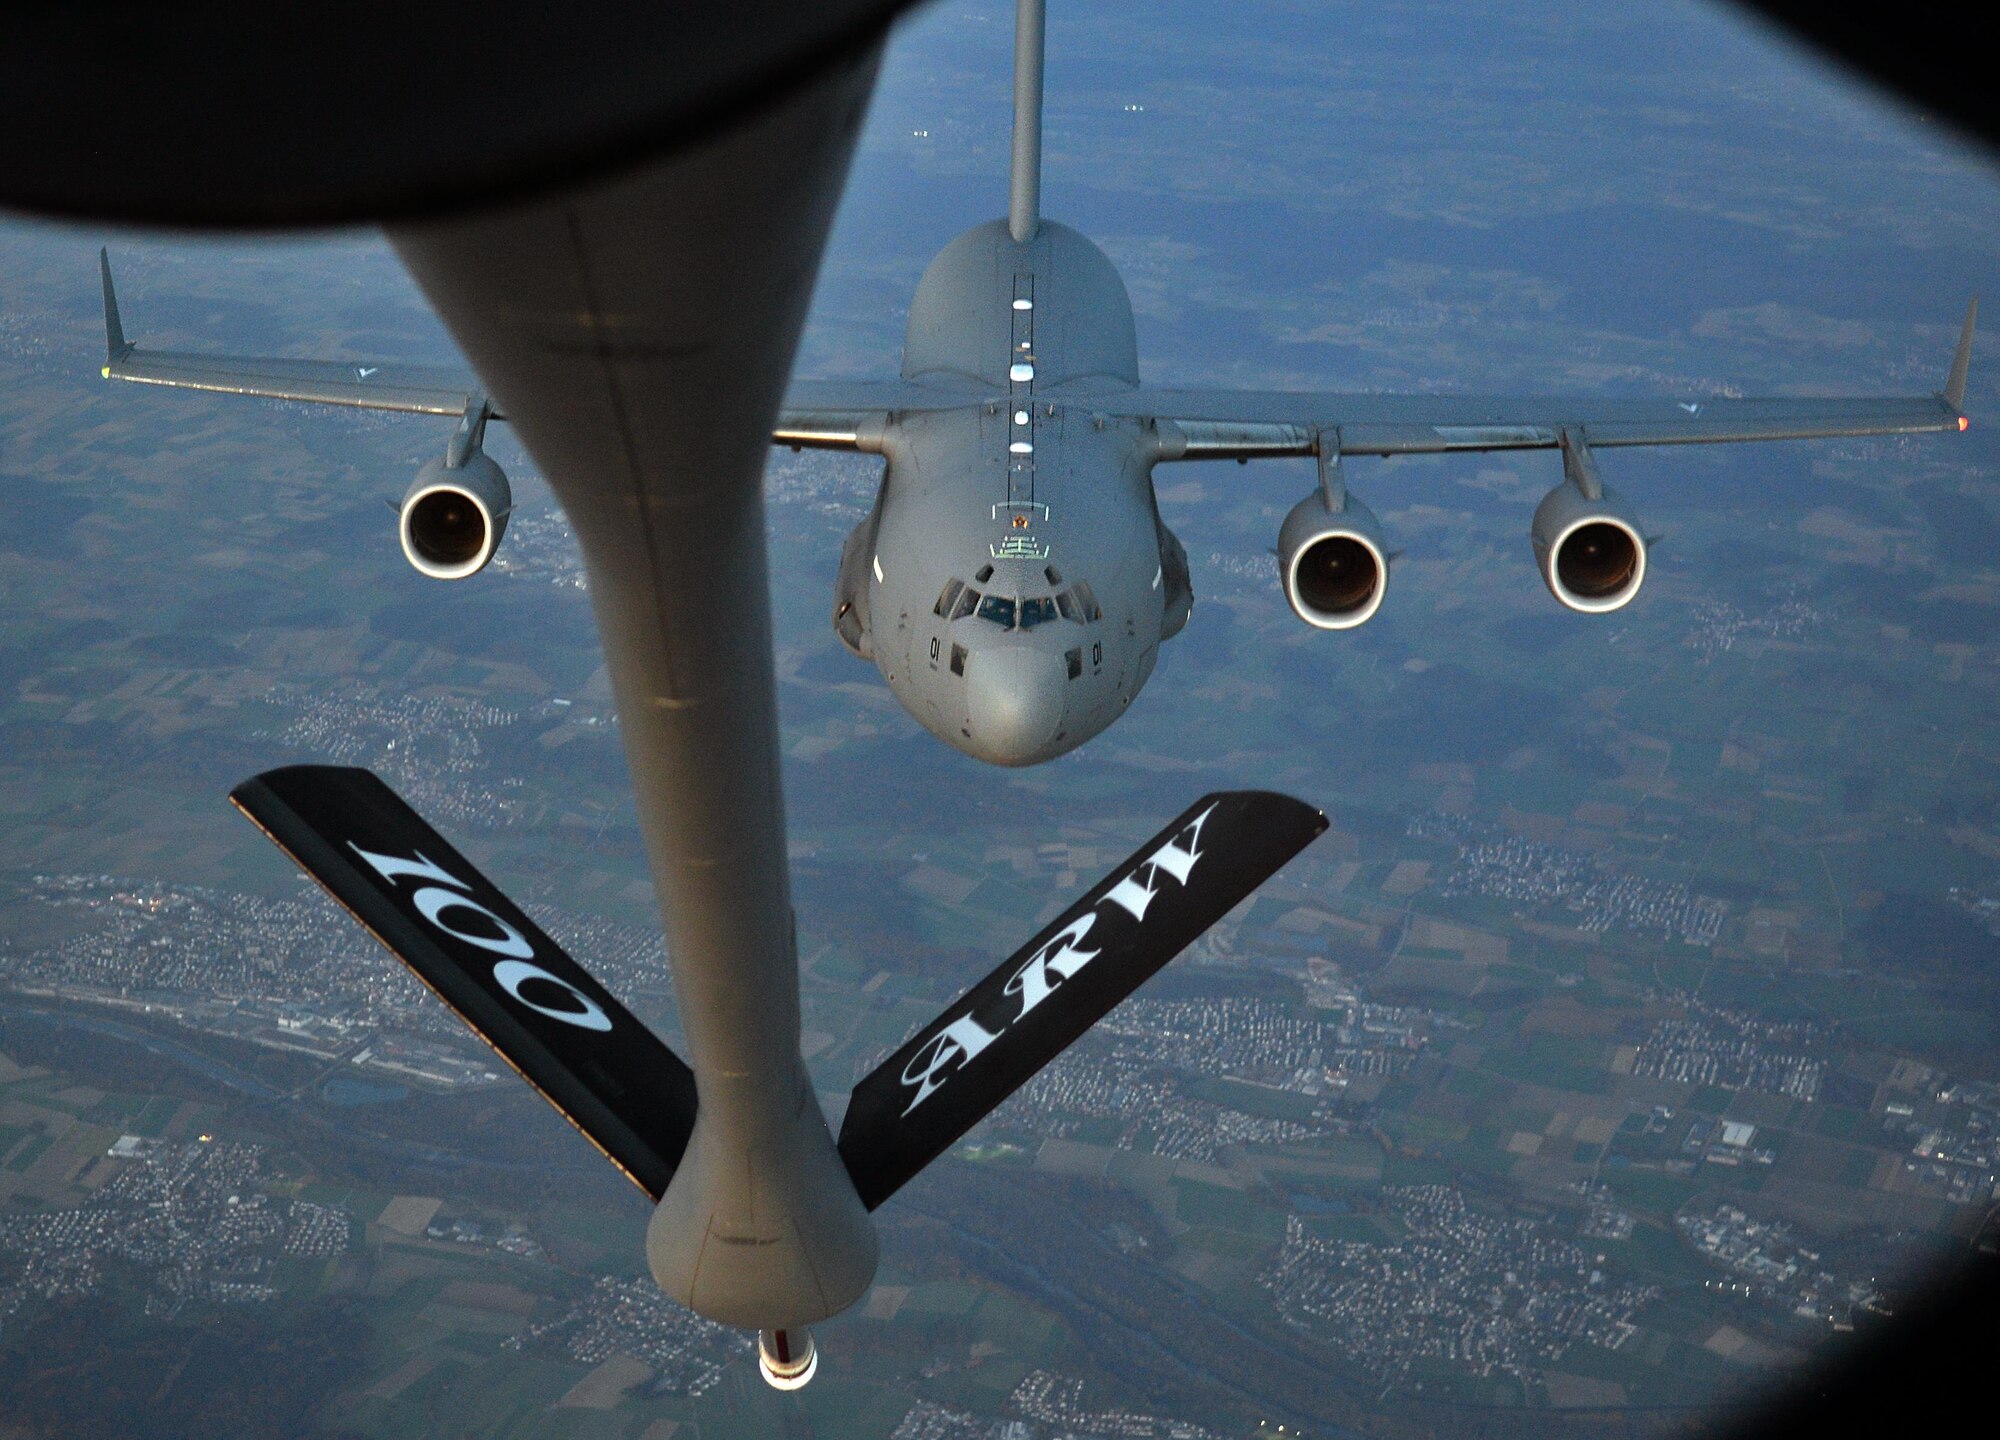 A C-17 Globemaster III flies behind a U.S. Air Force KC-135 during an aerial-refueling training exercise over Germany, Oct. 19, 2017. The C-17 was operated by the Heavy Airlift Wing, Papa Air Base, Hungary, which is comprised of approximately 145 personnel from 12 nations. (U.S. Air Force photo by Airman 1st Class Luke Milano)